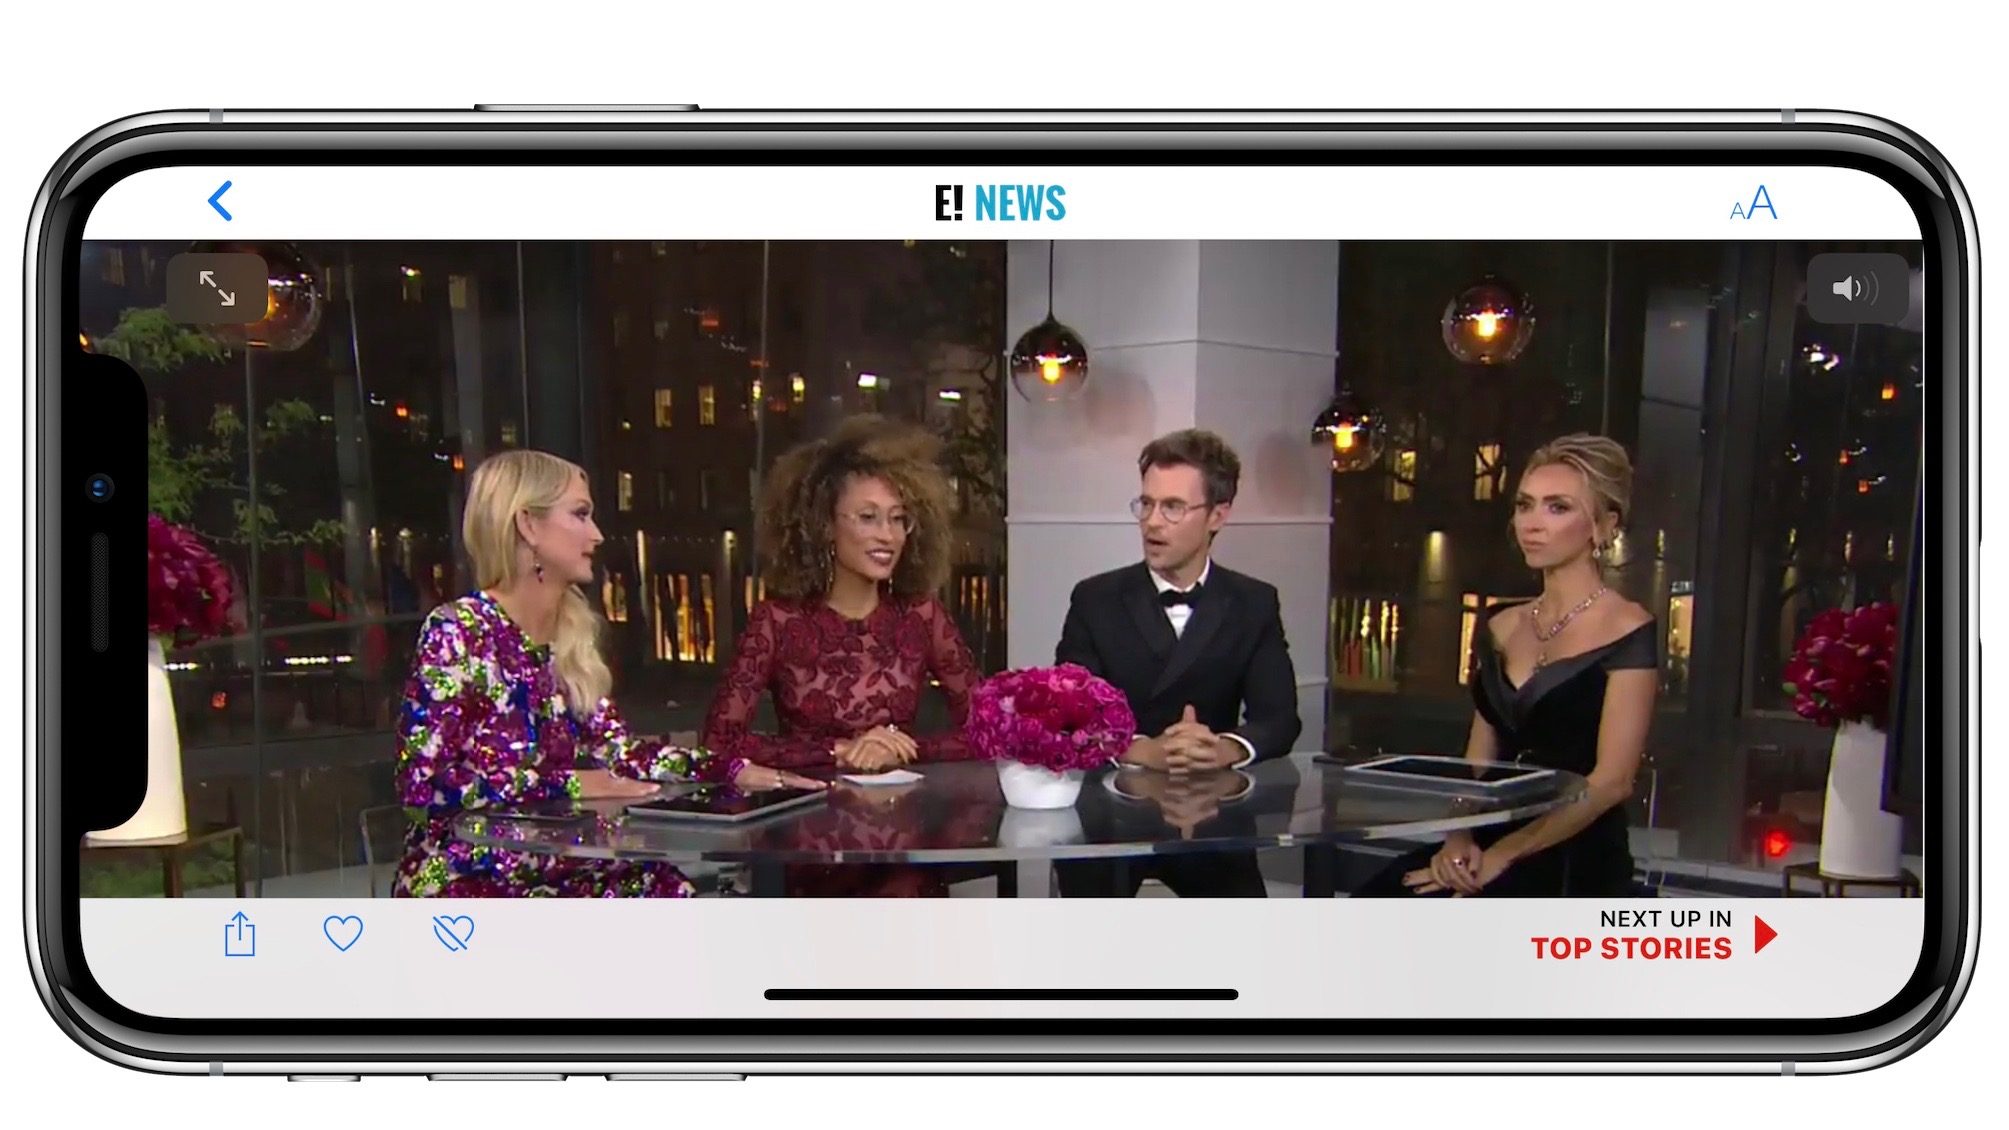 Apple News Continues Focus on Video With in-app Live Stream